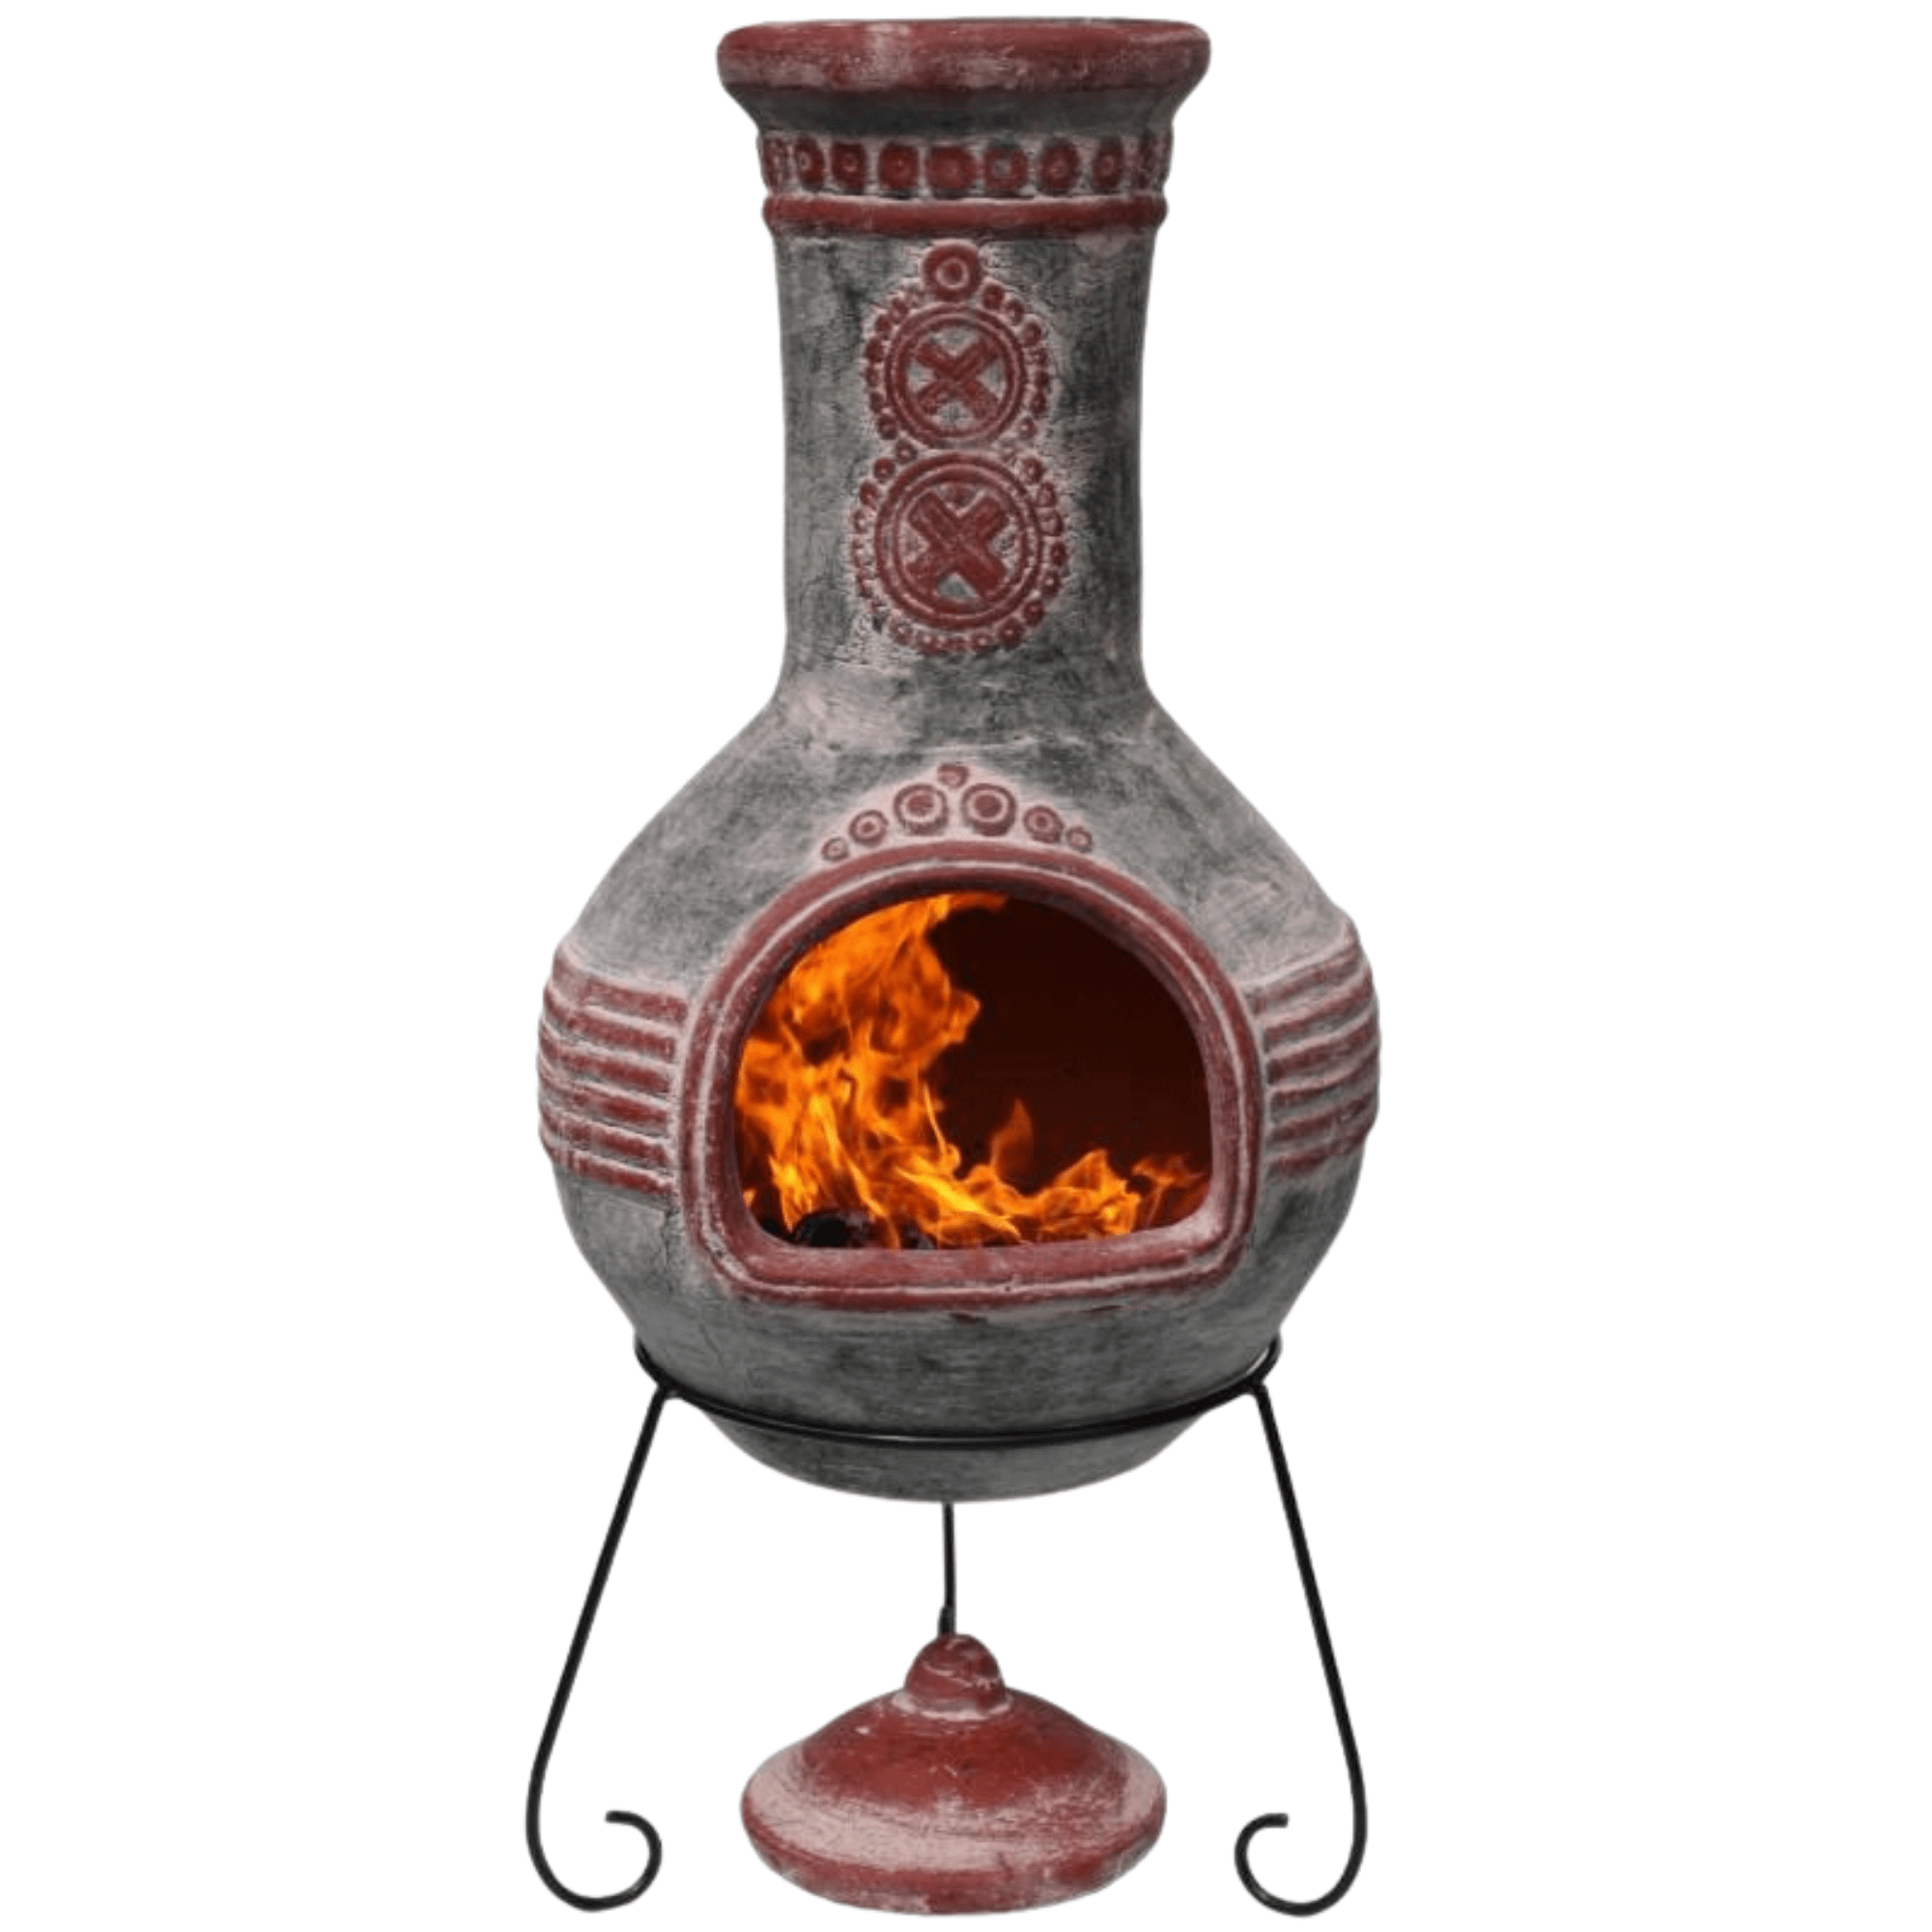 Perfect Patio UK Azteca XL Mexican Chimenea in green and red